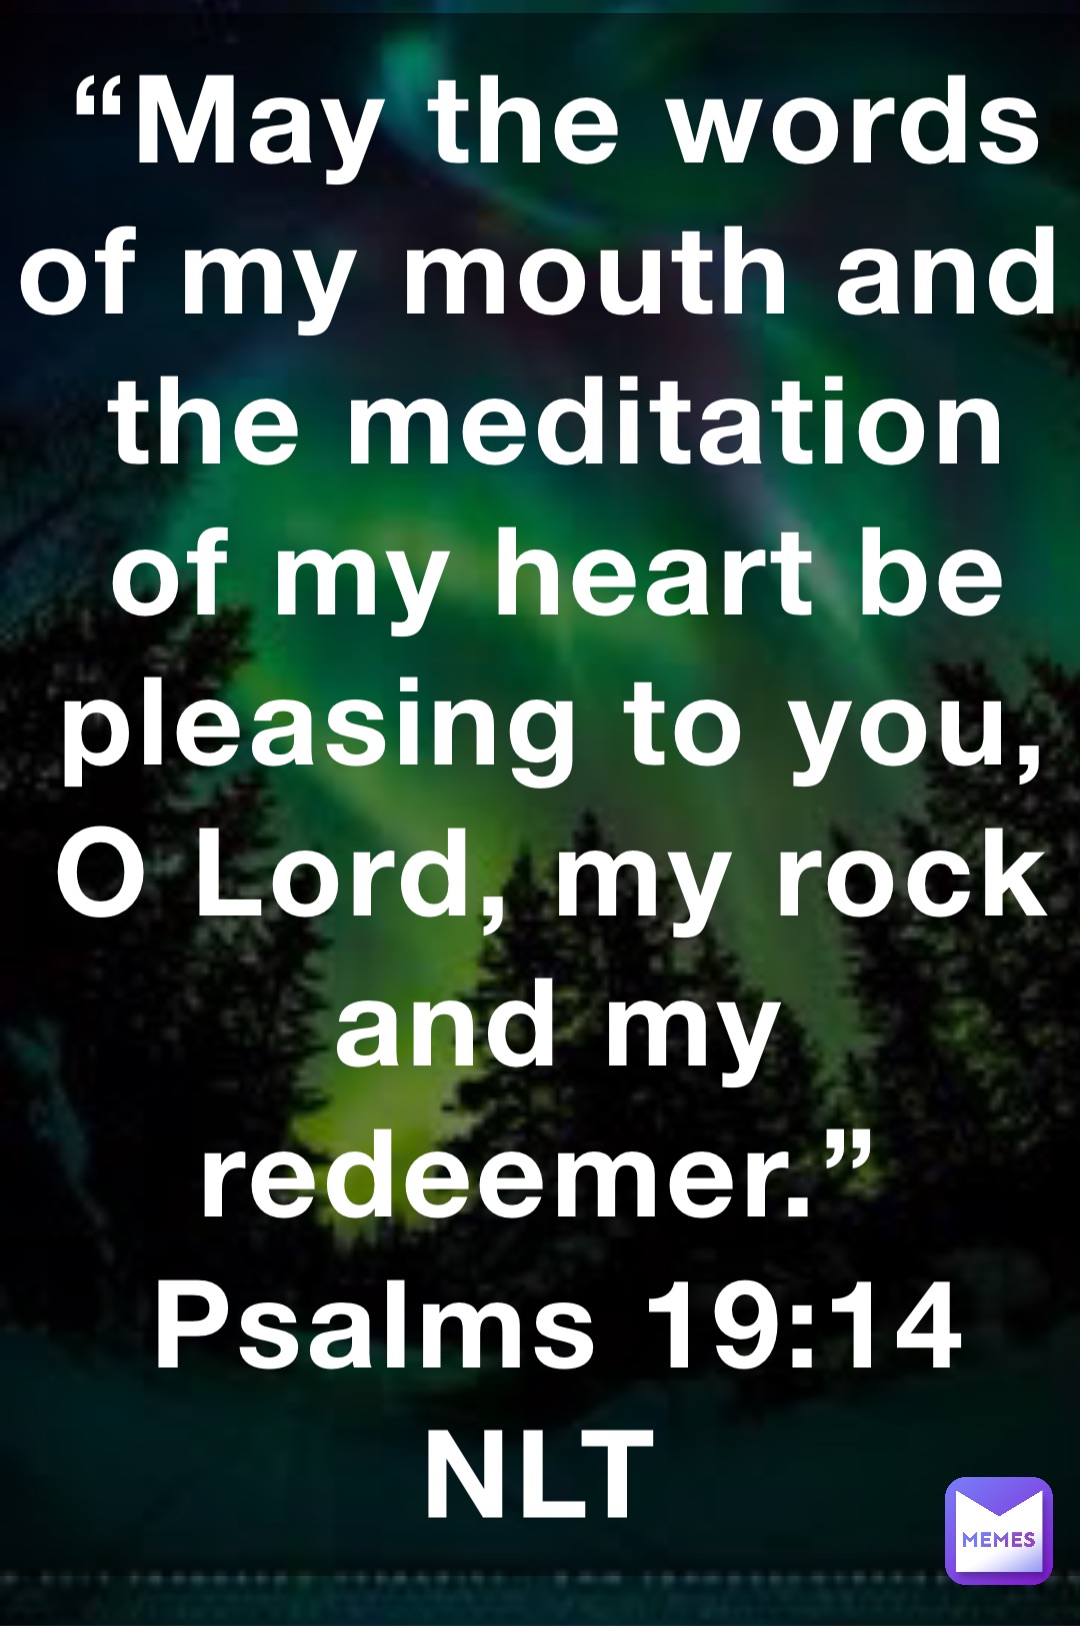 “May the words of my mouth and the meditation of my heart be pleasing to you, O Lord, my rock and my redeemer.”
‭‭Psalms‬ ‭19:14‬ ‭NLT‬‬